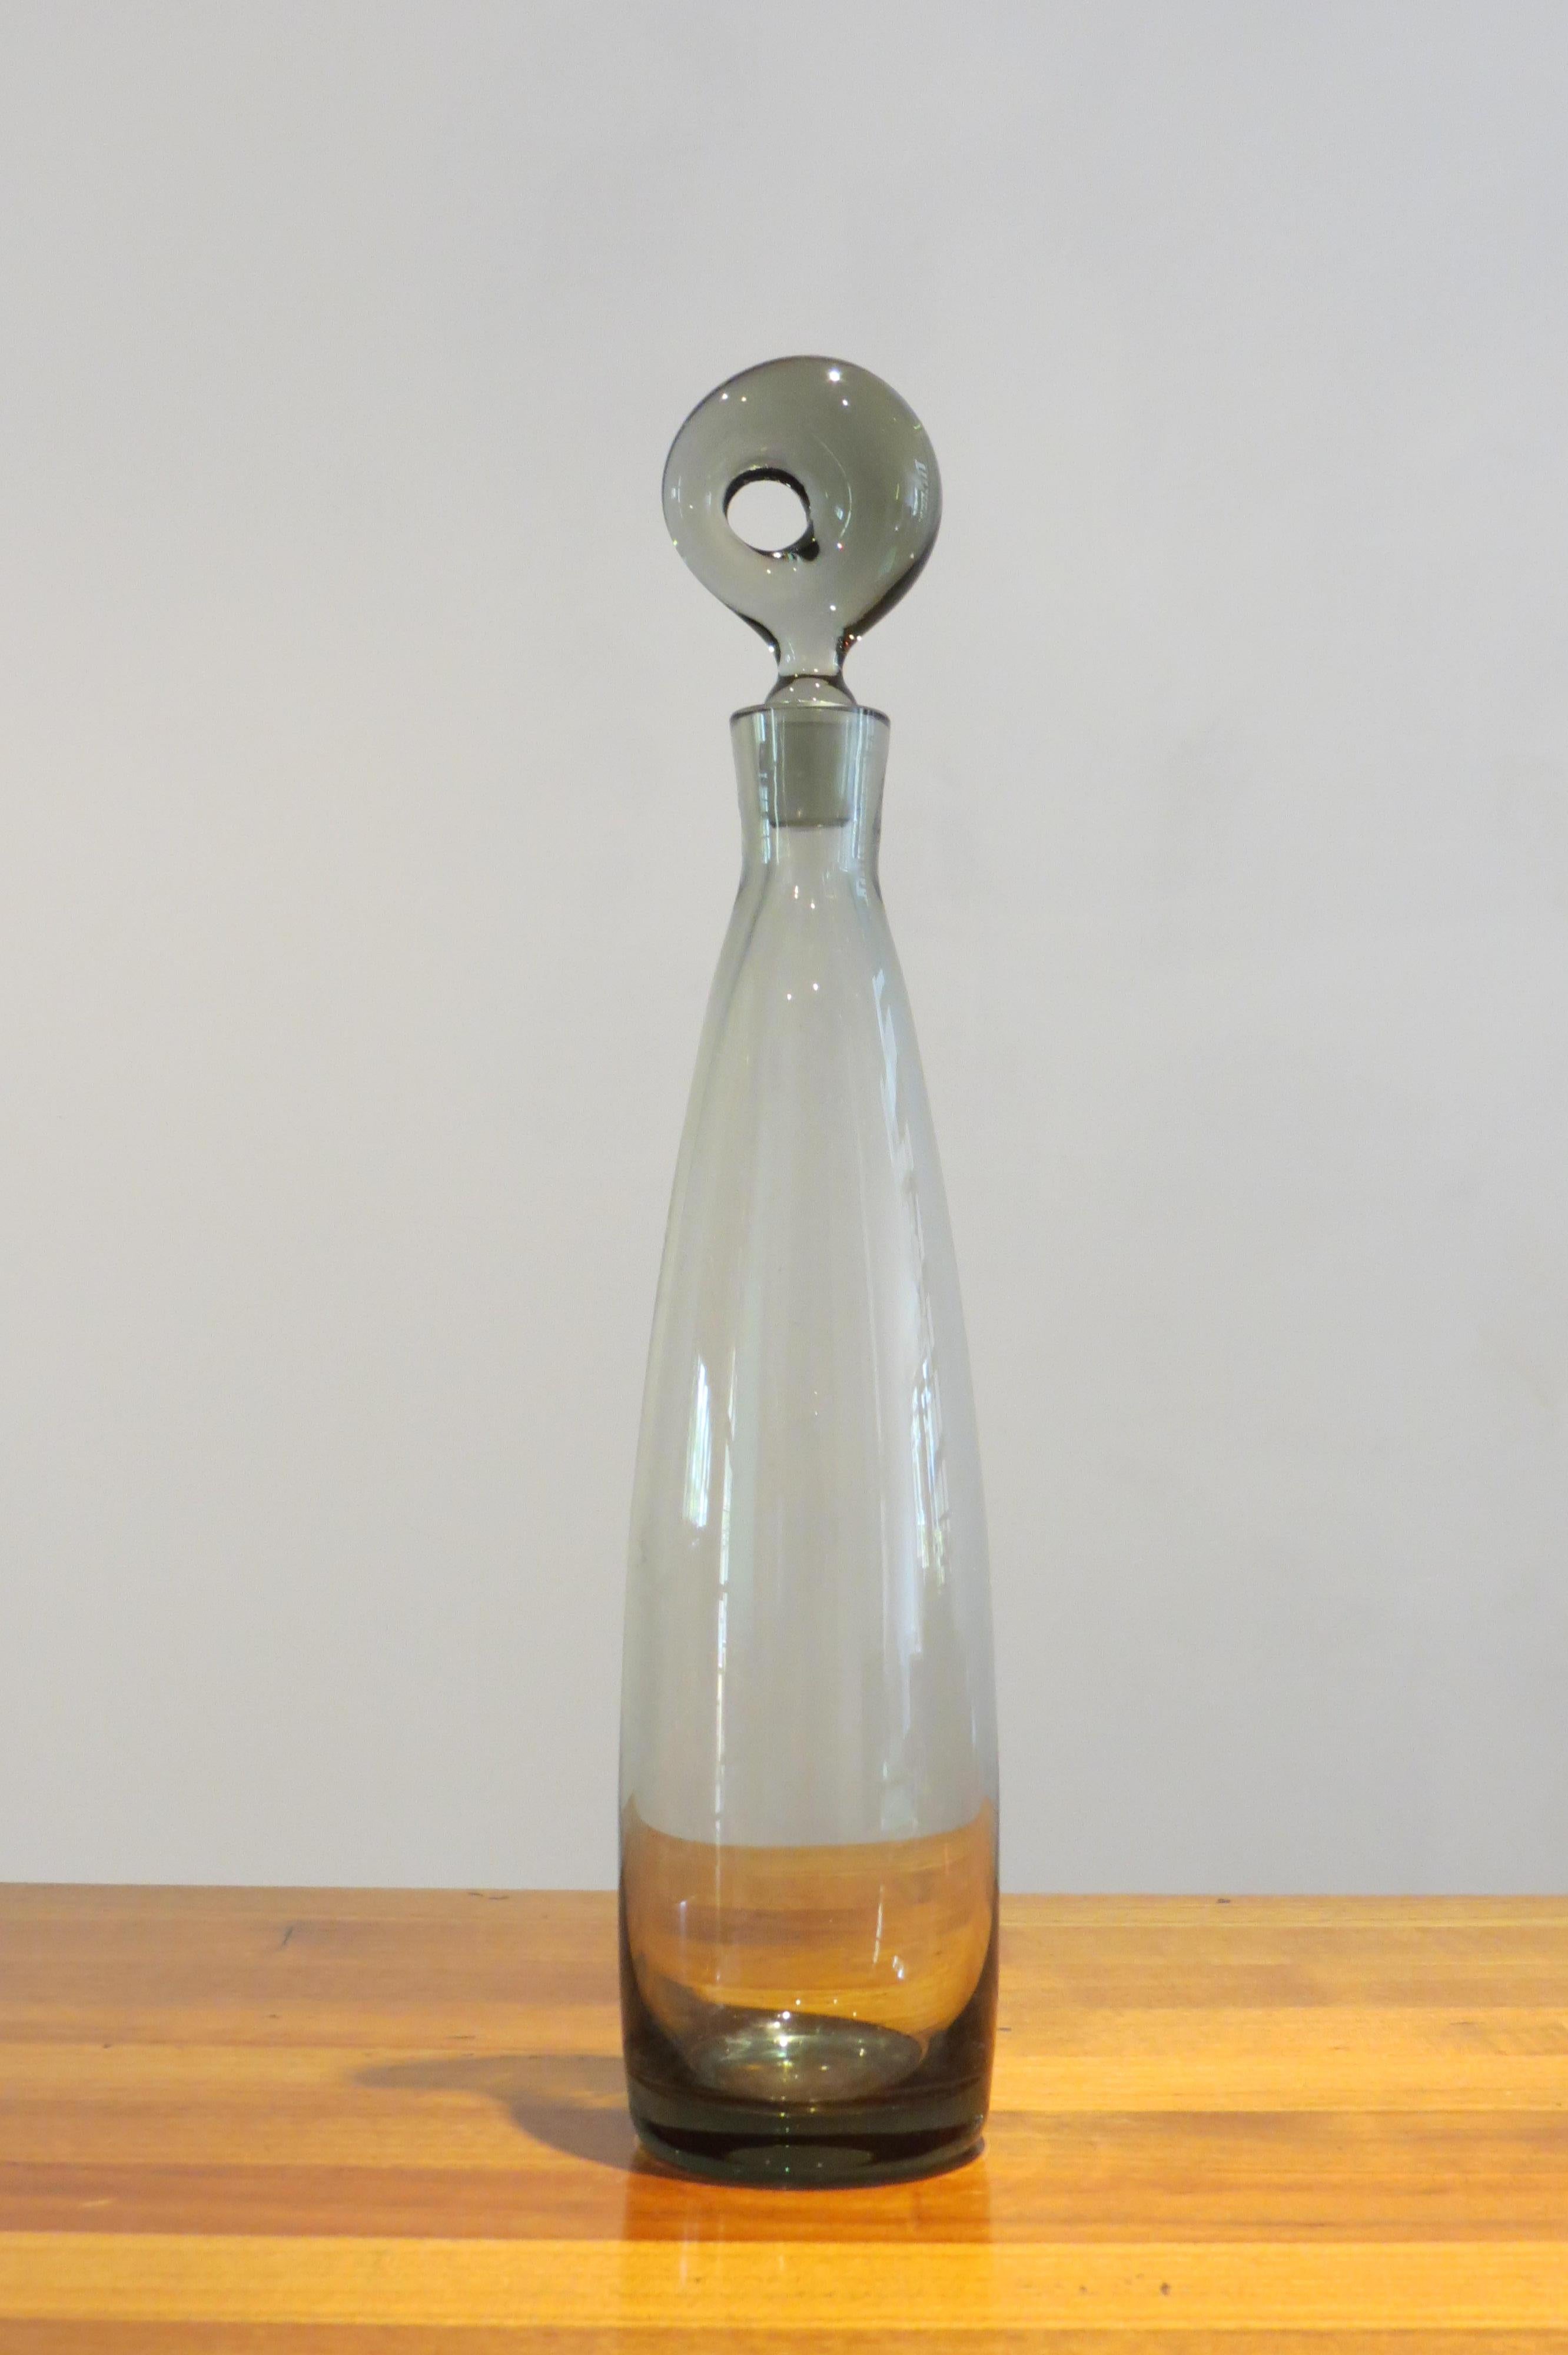 Holmegaard Aristokrat decanter by Per Lutken, 1950s decanter designed by Per Lutken in the 1950s and manufactured by Holmegaard, Denmark.
In good condition.
Smoked glass
Measures: 38cm tall and 8cm diameter widest point.
ST932.



 